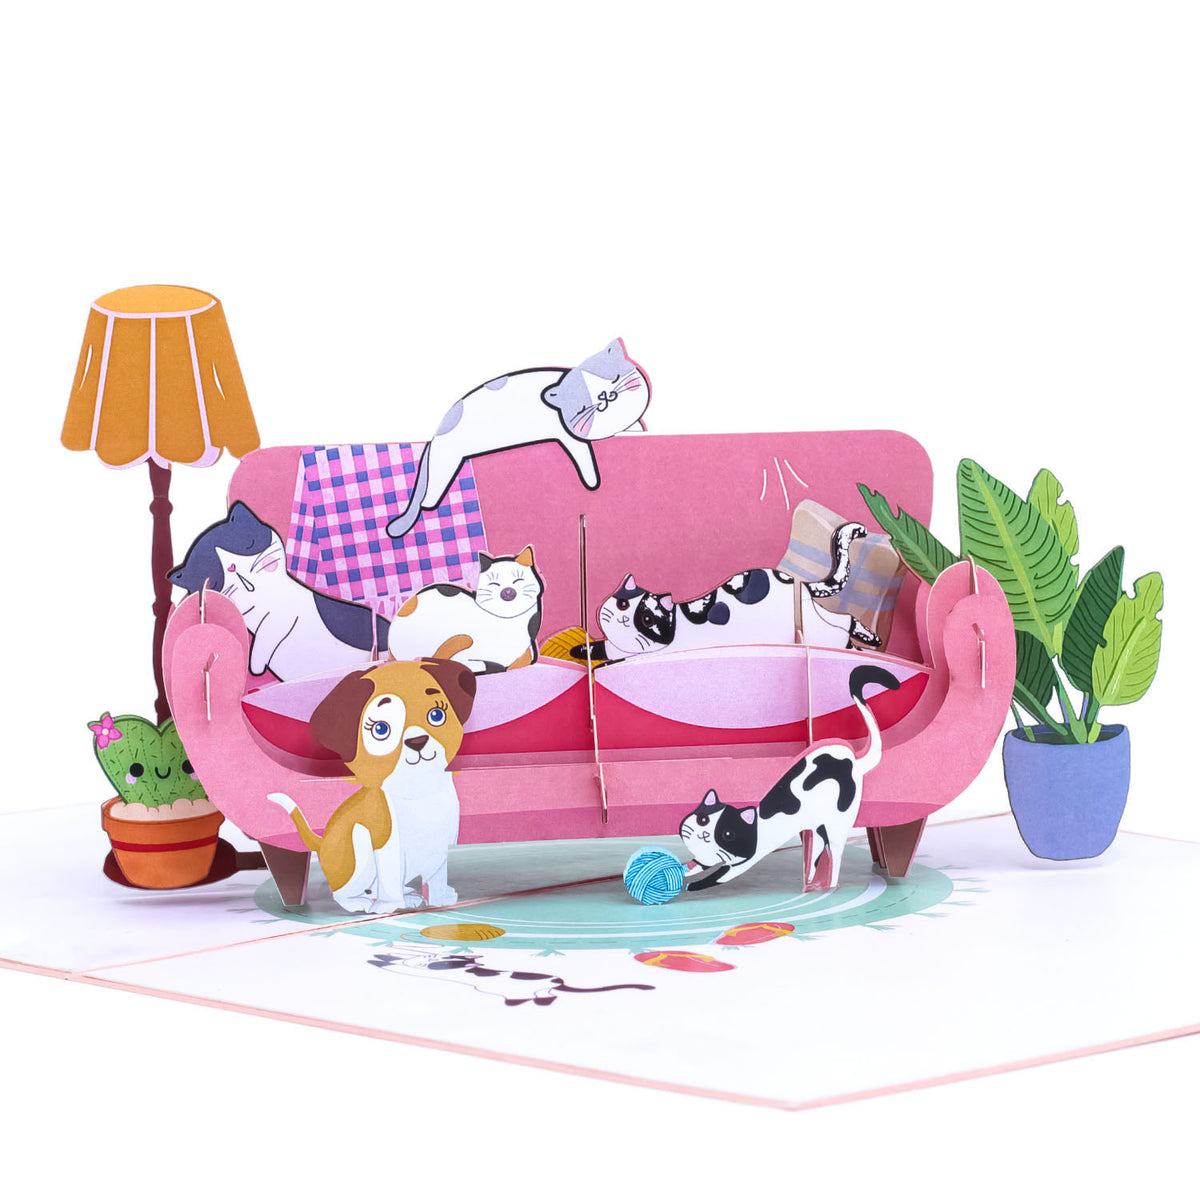 Dogs, Cats Playing Pop-Up Card